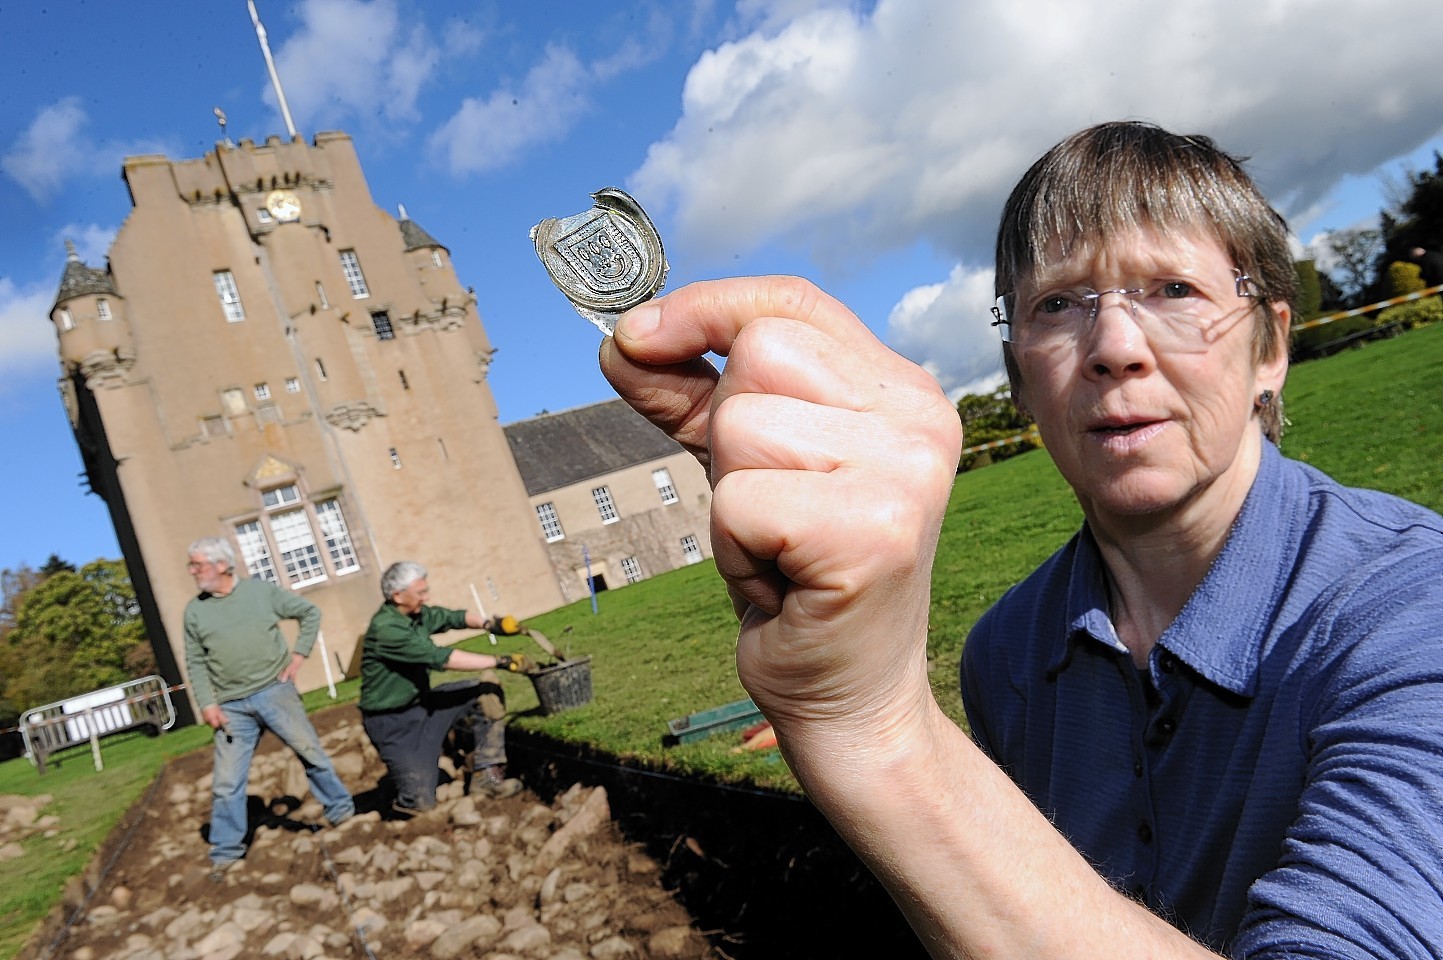 Volunteer Veronica Ross with a bottle seal showing the Burnett Coat Of Arms found at an archaeological dig at Crathes Castle.